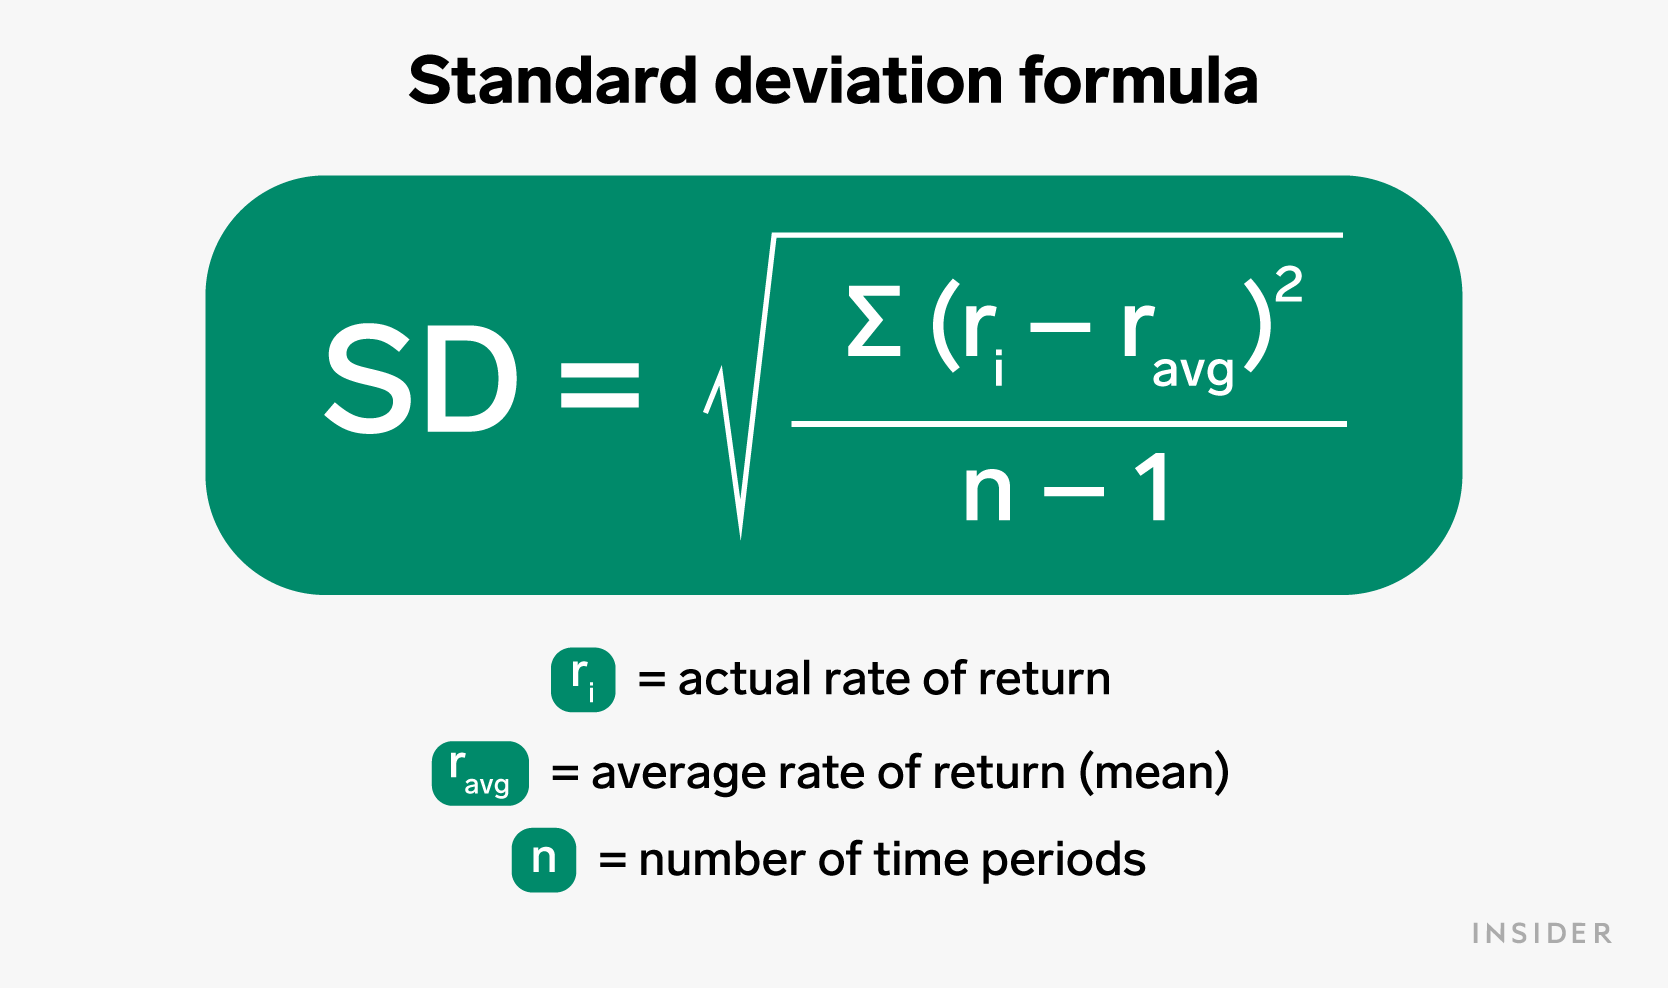 How to calculate standard deviation